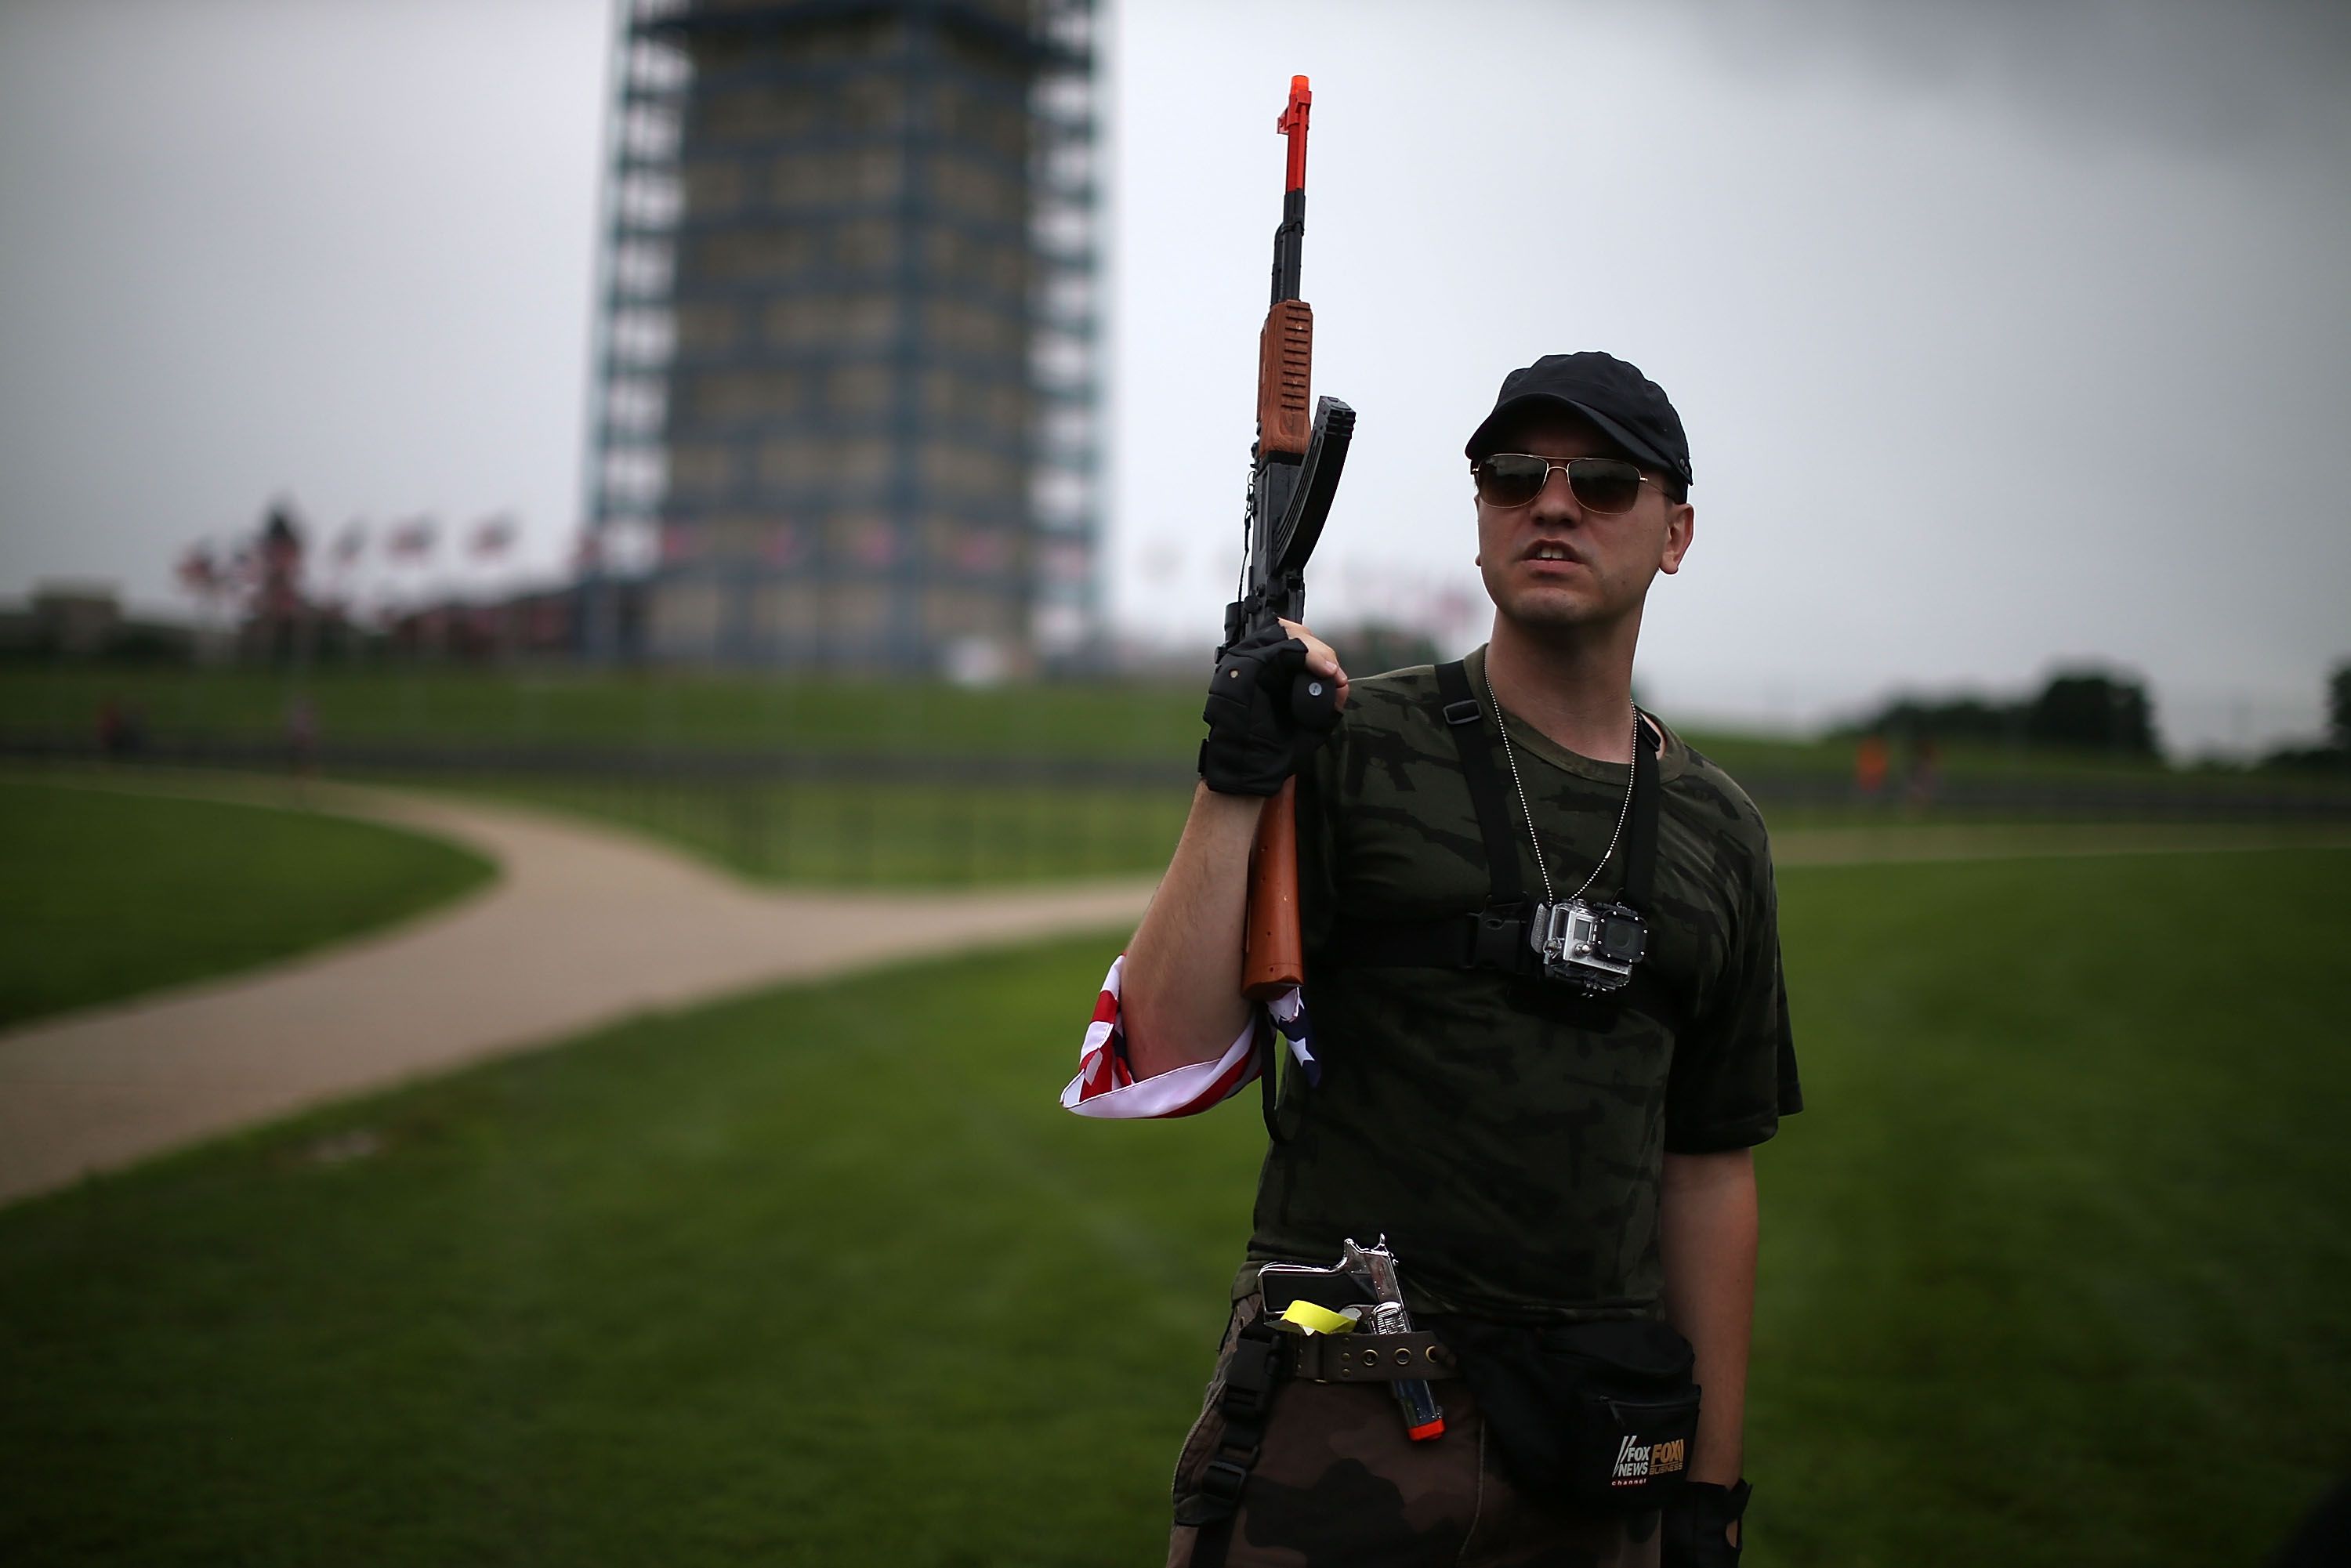 Libertarian activist Austin Petersen holds a toy gun rally on the grounds of the Washington Monument in 2013.